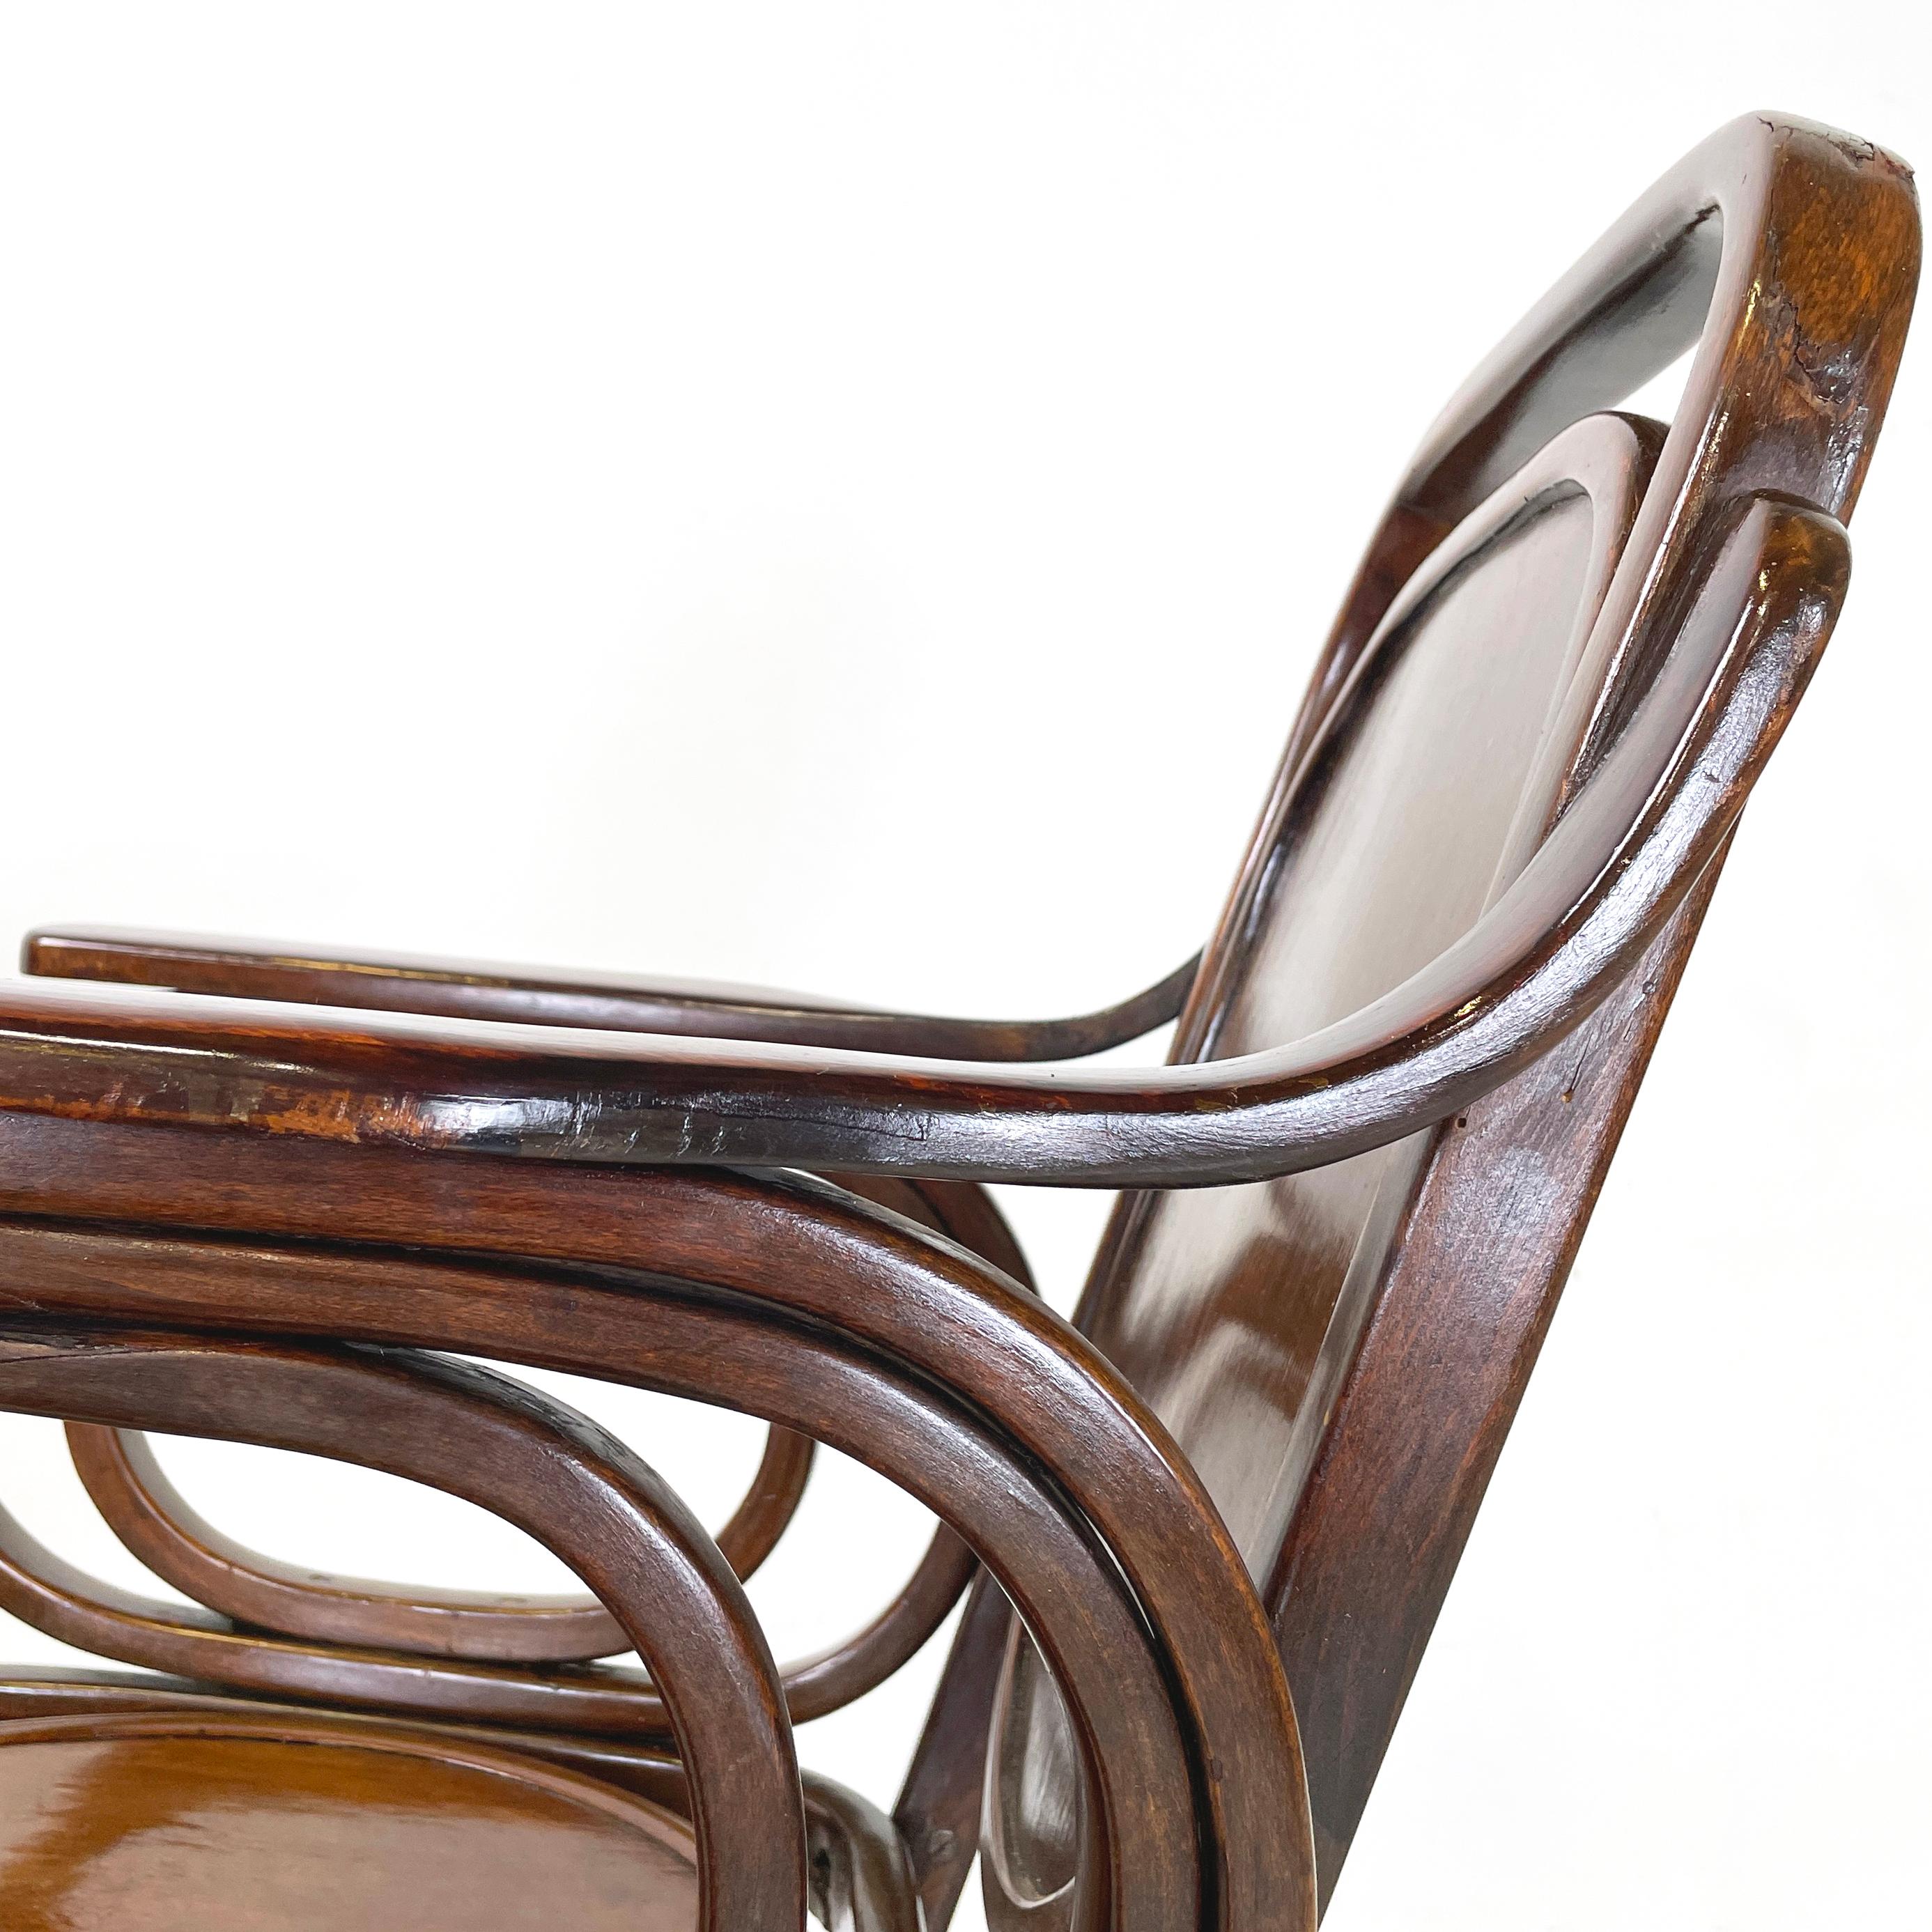 Austrian Art Nouveaux Swivel chair with armrests in wood by Thonet, early 1900s For Sale 11